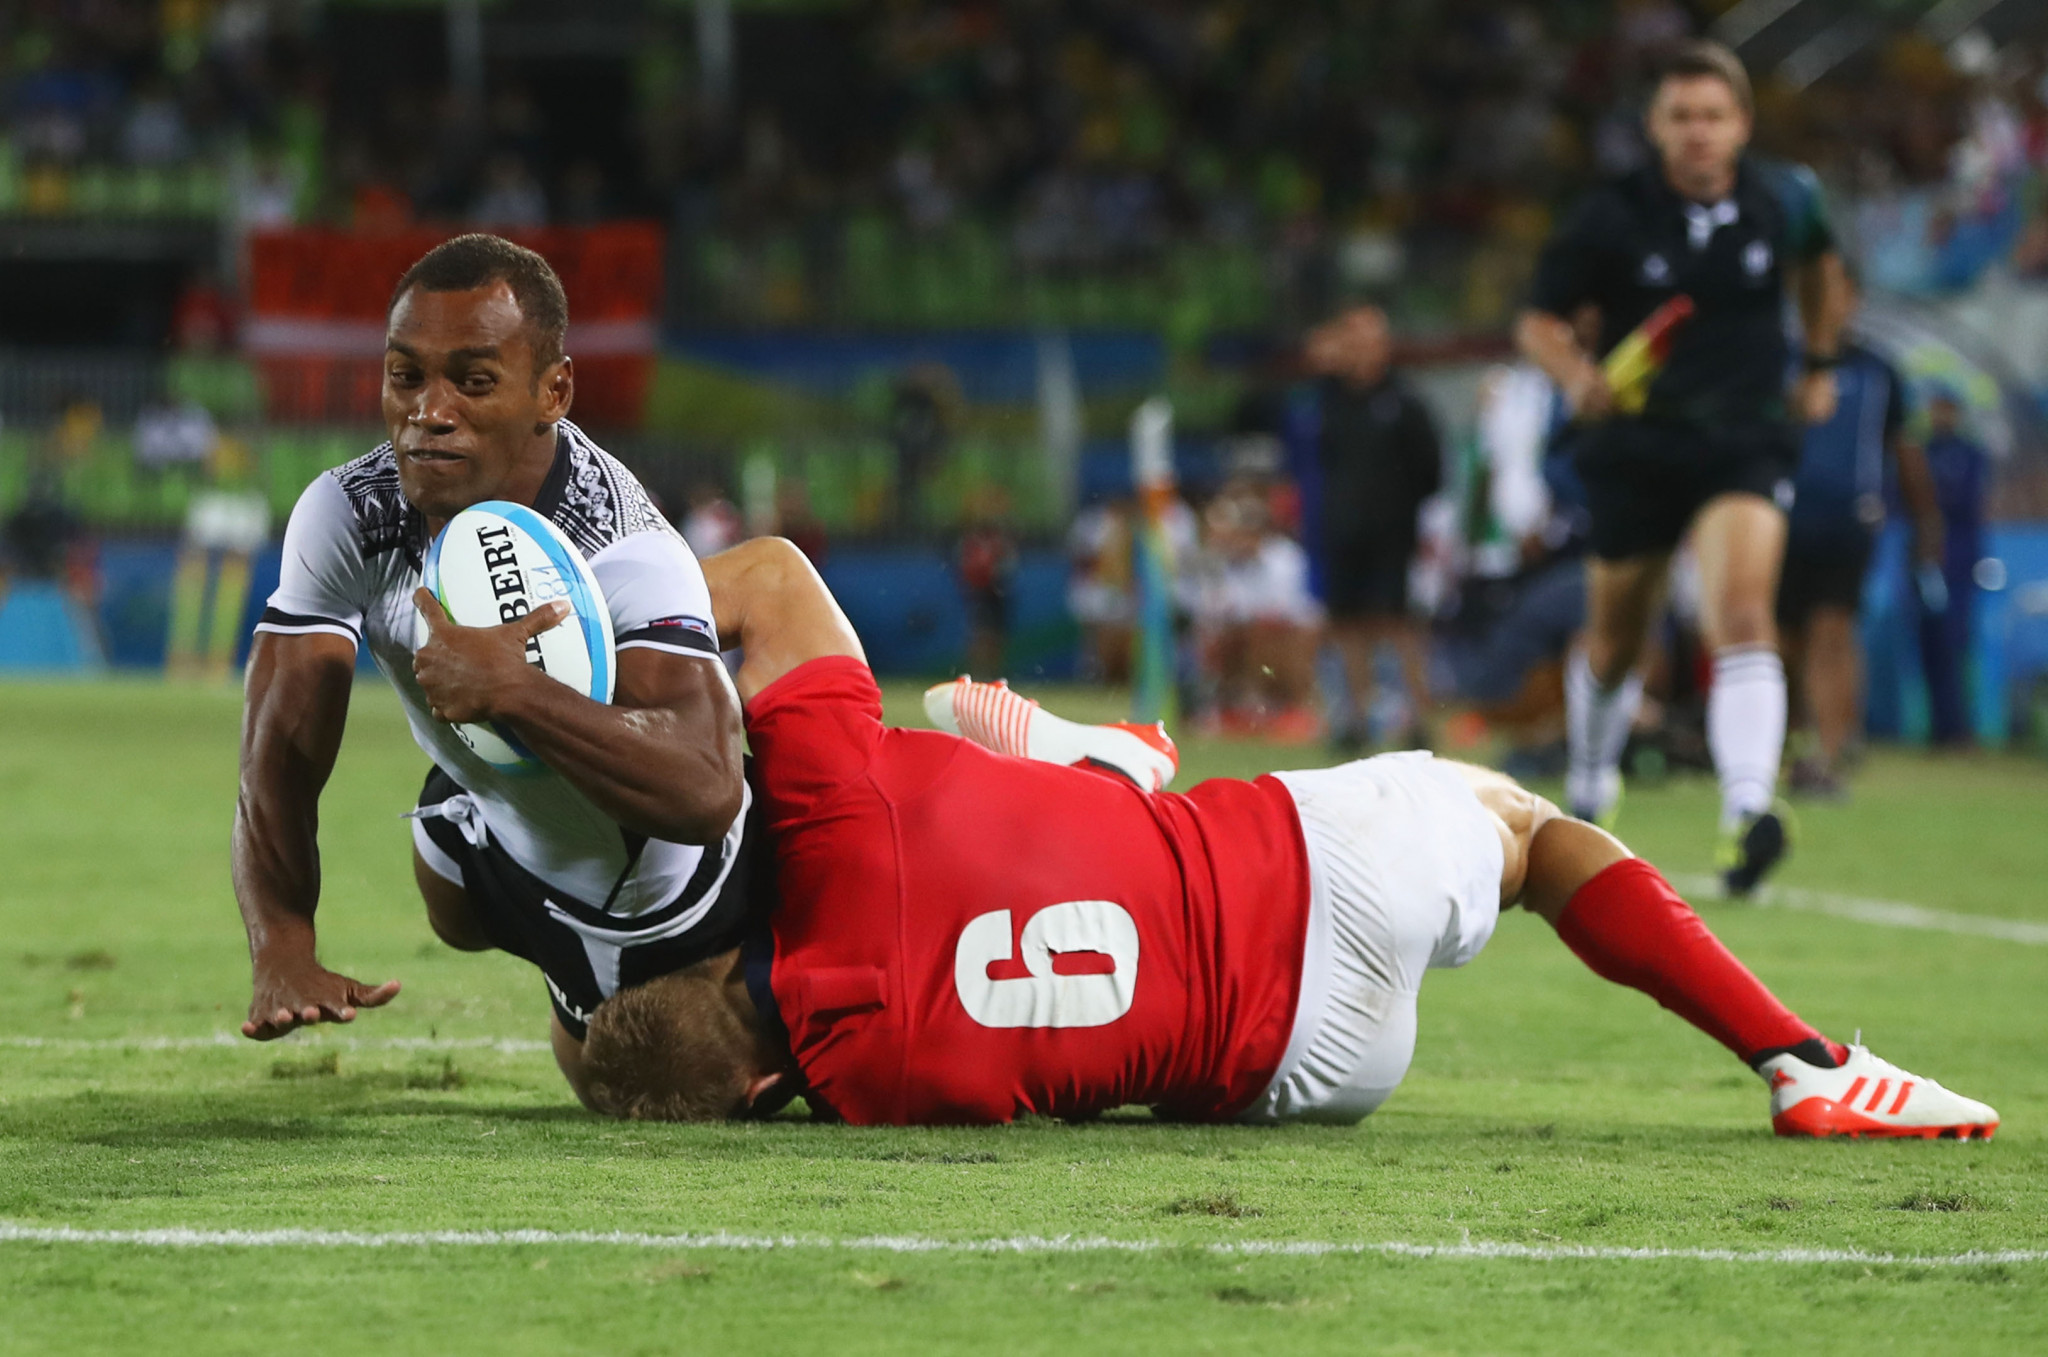 Fiji's 2016 Olympic gold medal in rugby sevens followed a trio of successes at The World Games ©Getty Images